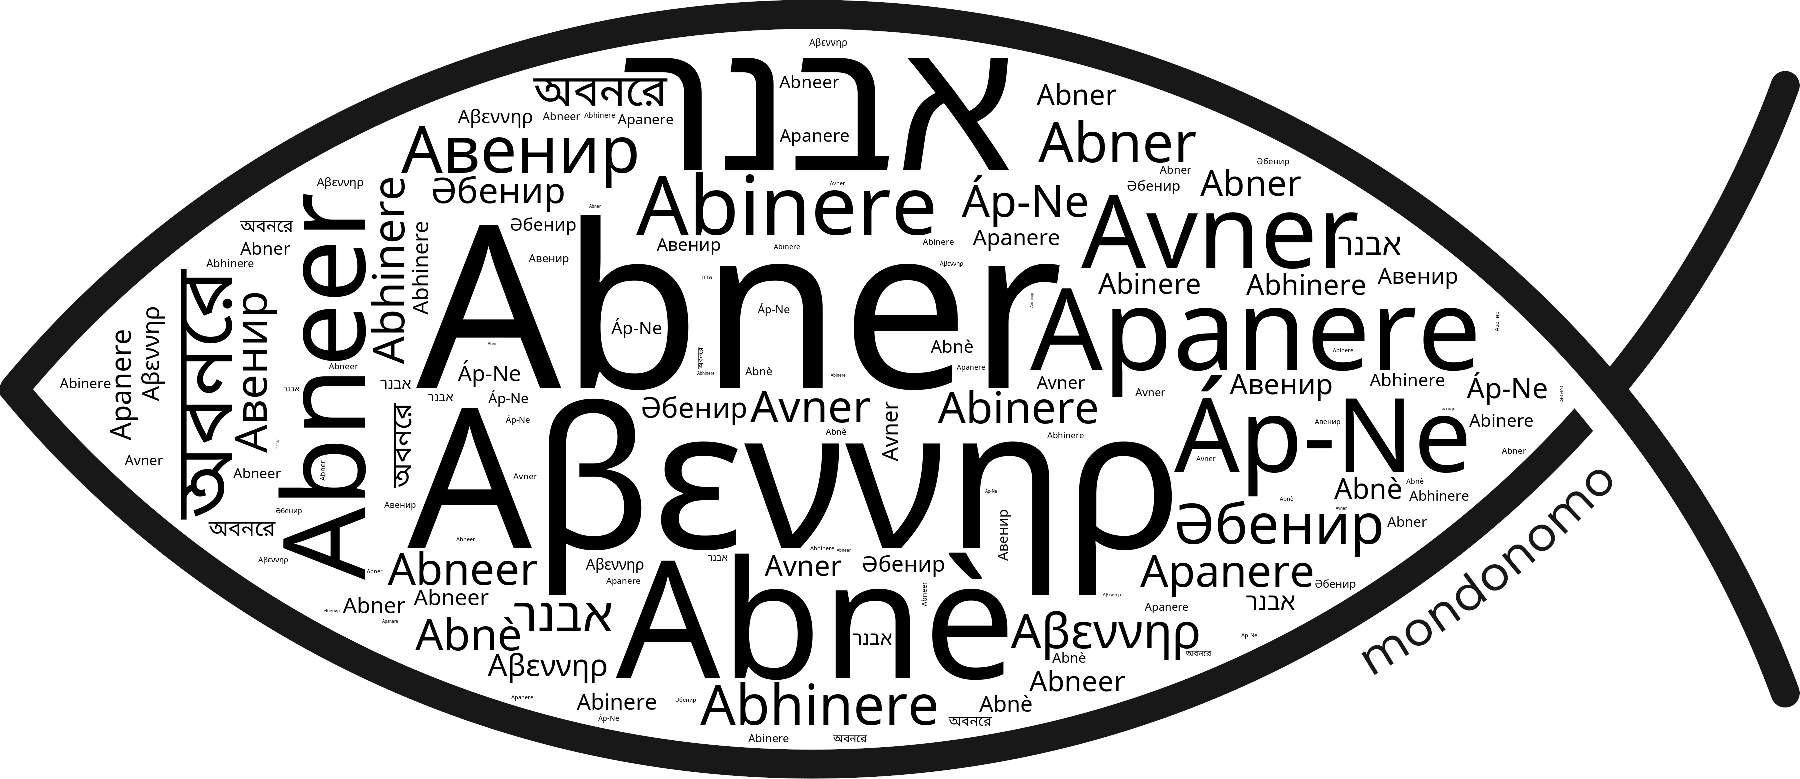 Name Abner in the world's Bibles